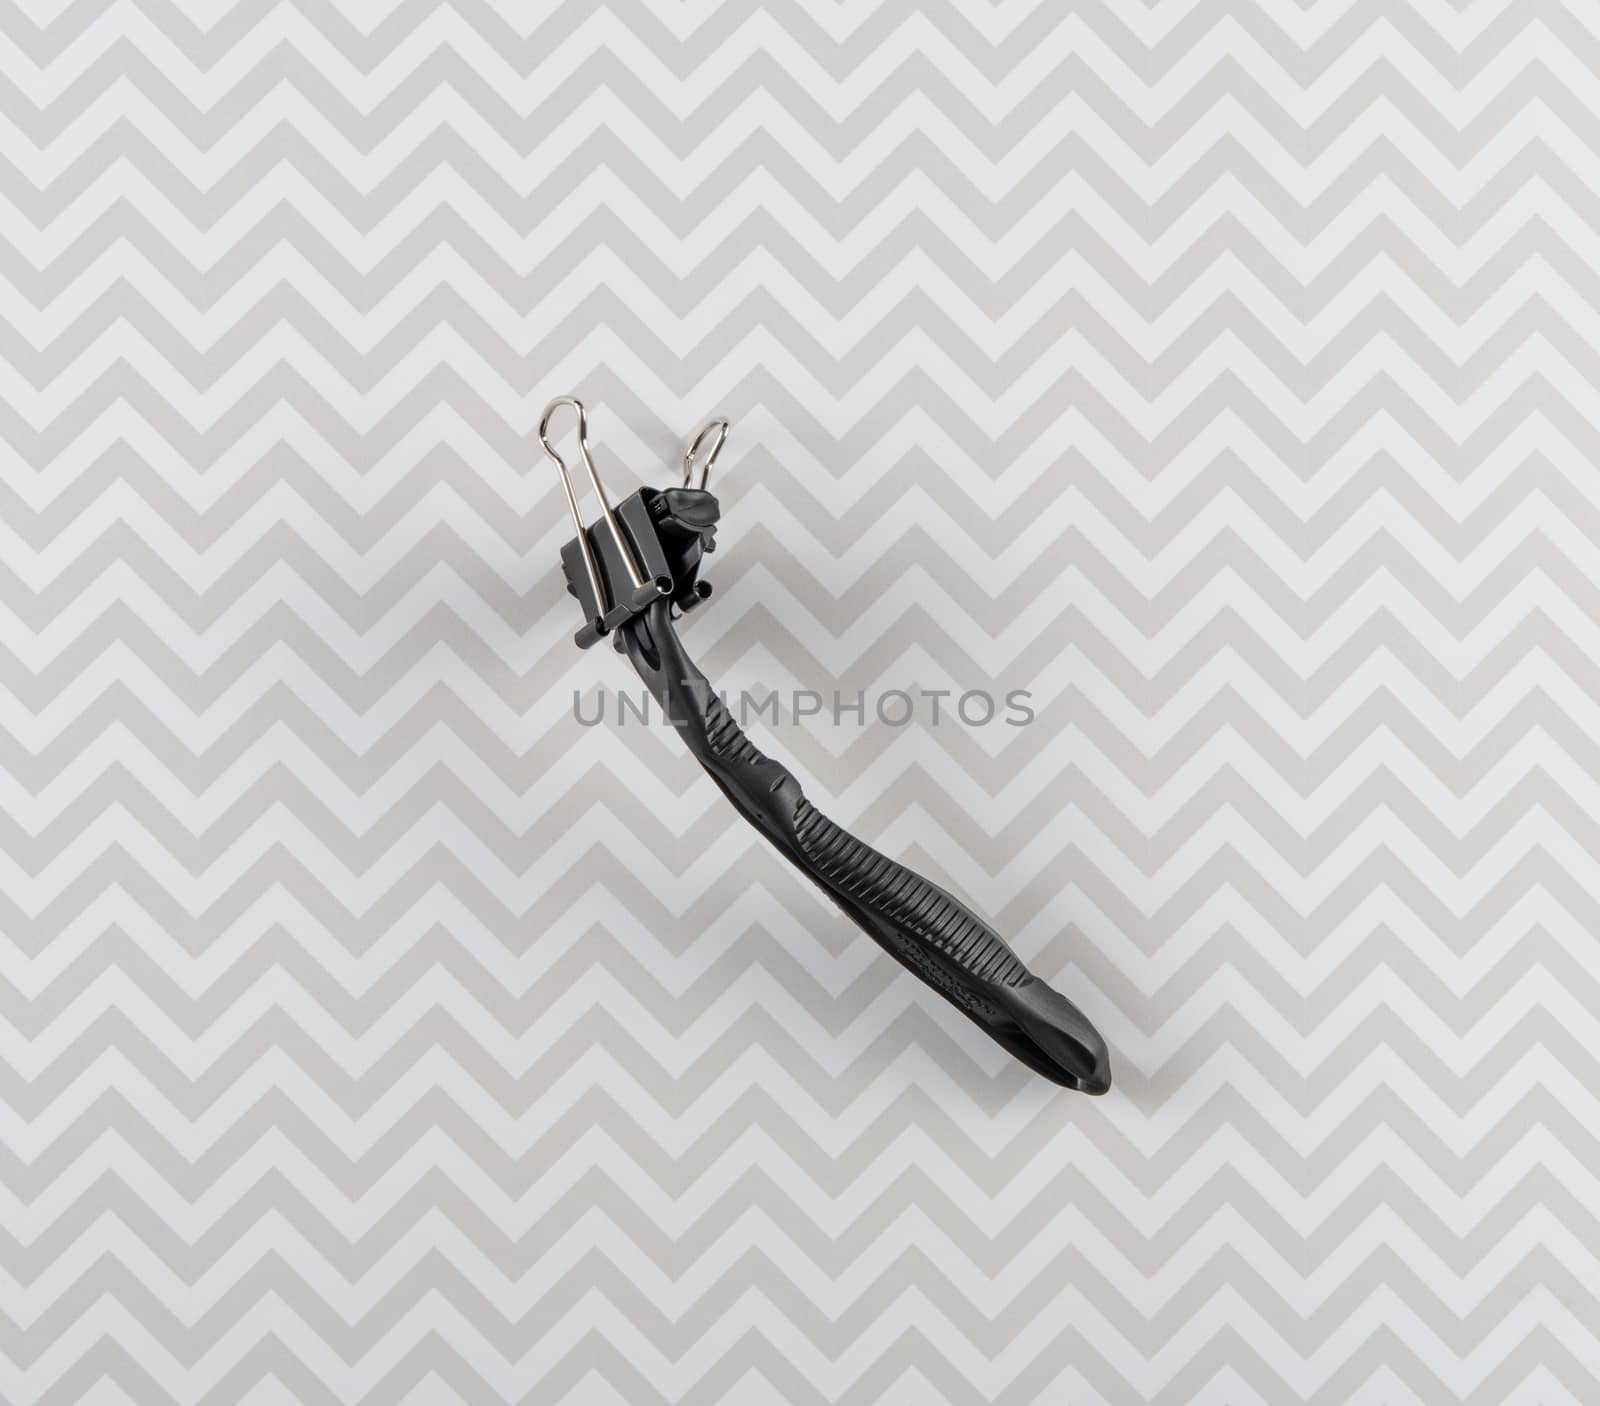 Disposable Razor With Binder Clip Side View by krisblackphotography